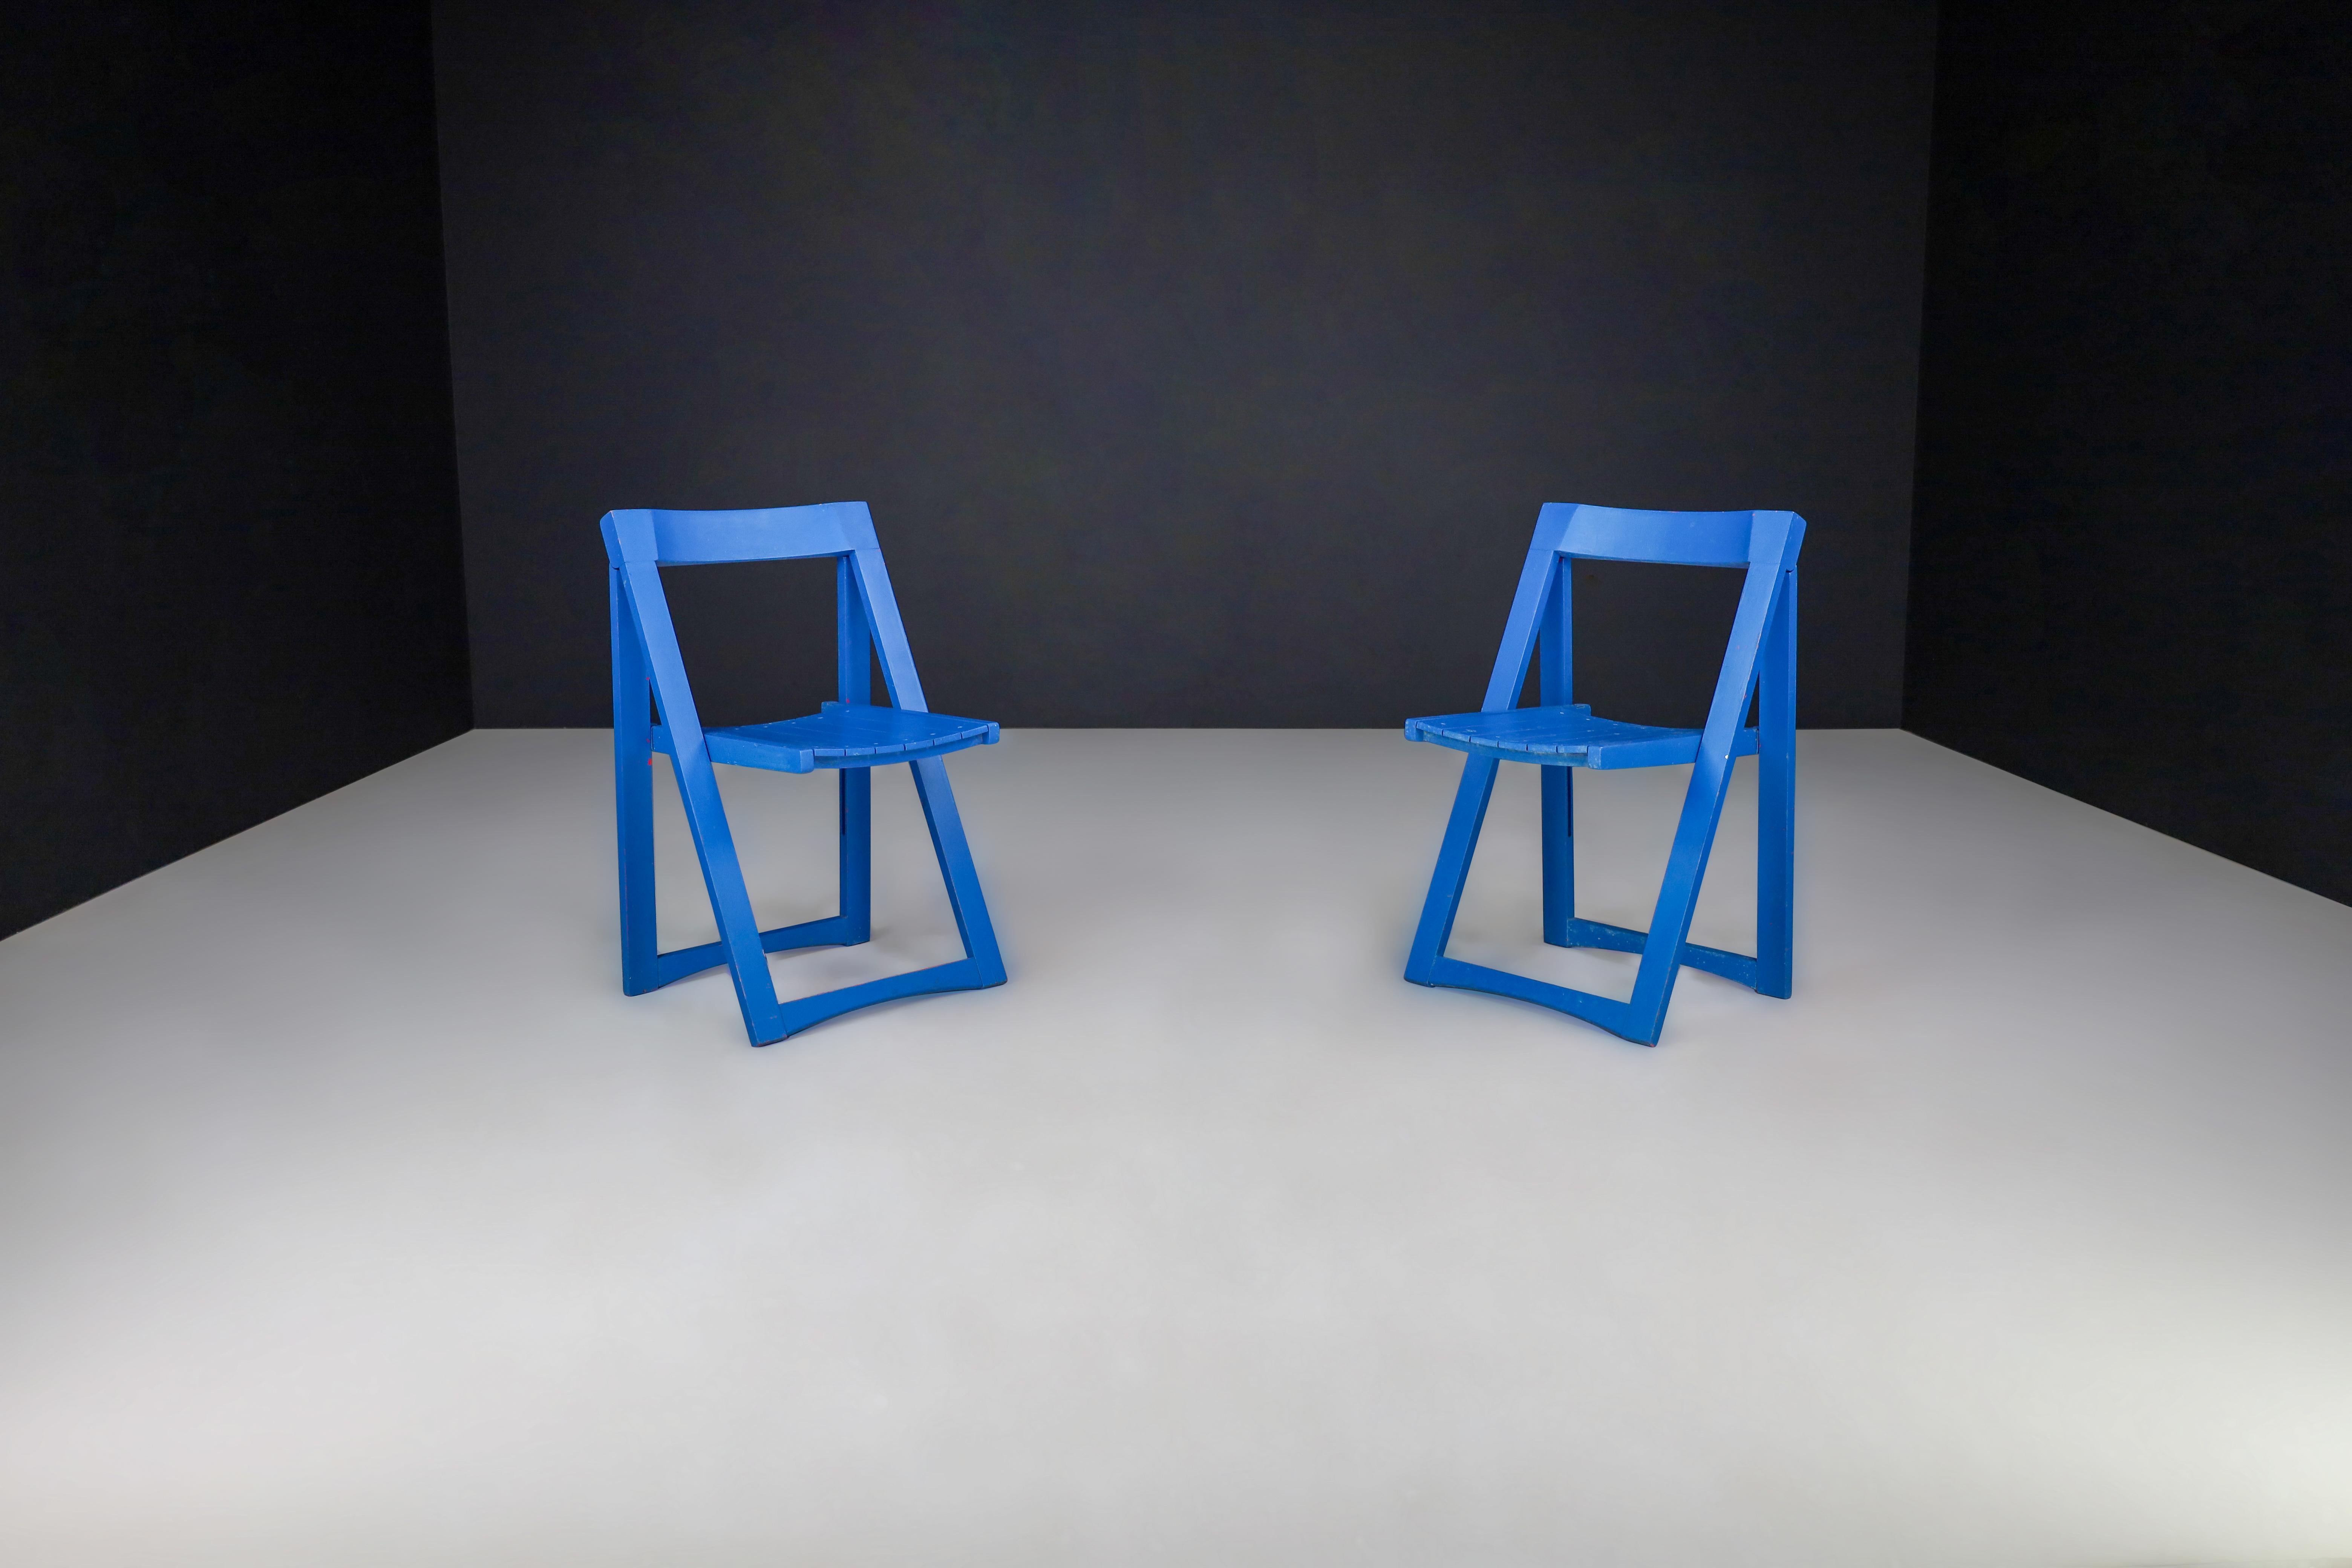 Aldo Jacober for Alberto Bazzani Red Painted Folding Chairs Italy 1960

These 2 folding chairs are made of high-quality beechwood with a patinated finish and painted in a striking shade of blue. They were designed by Aldo Jacober, a